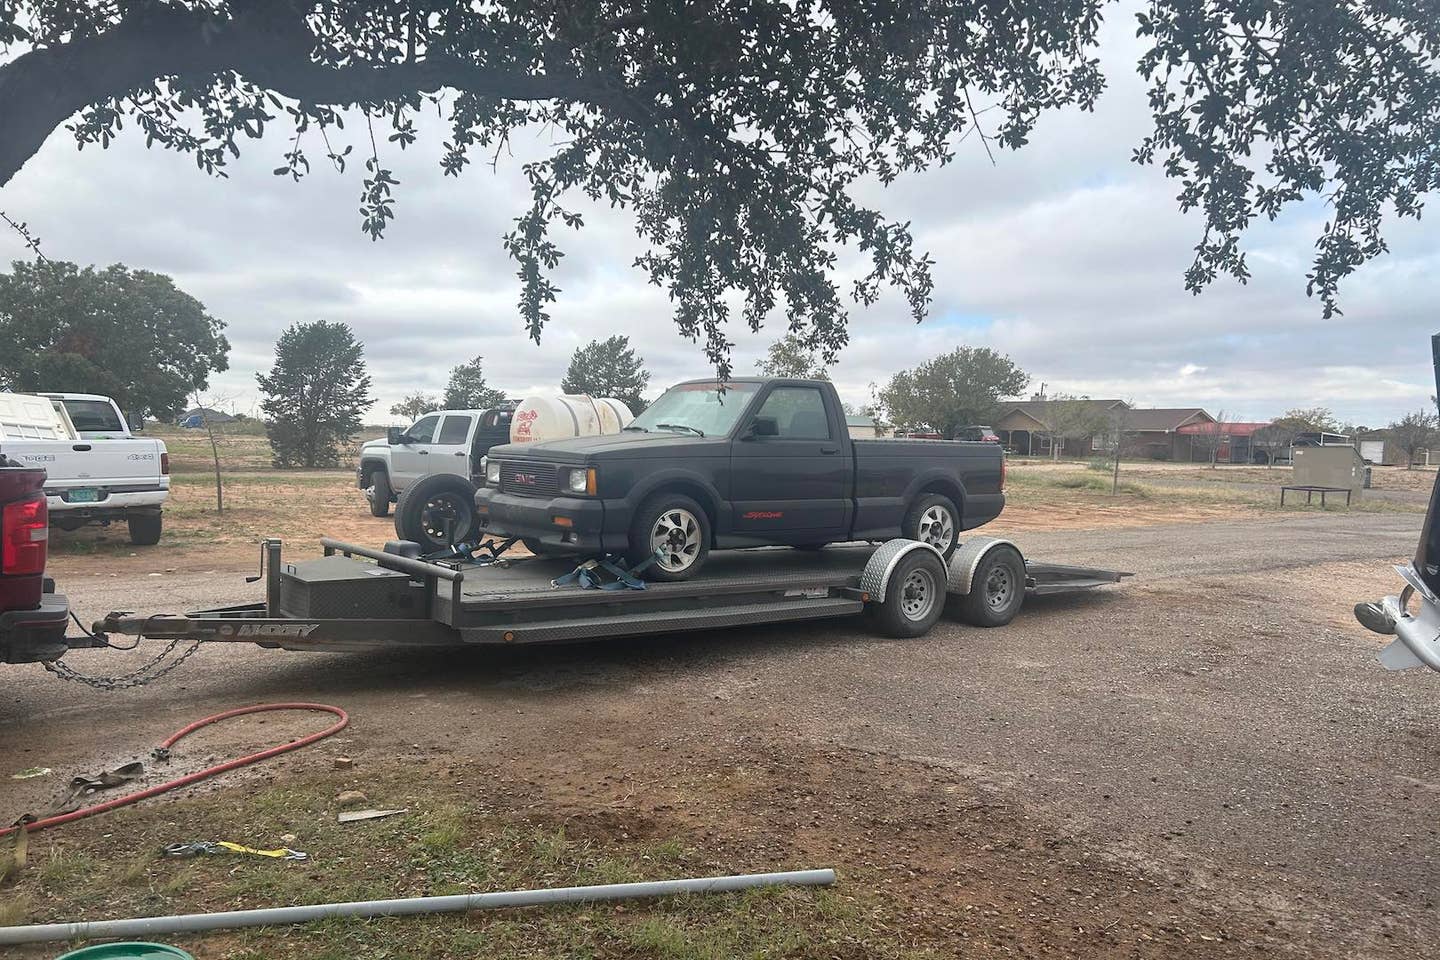 The GMC Syclone reaches its new home on a Texas ranch